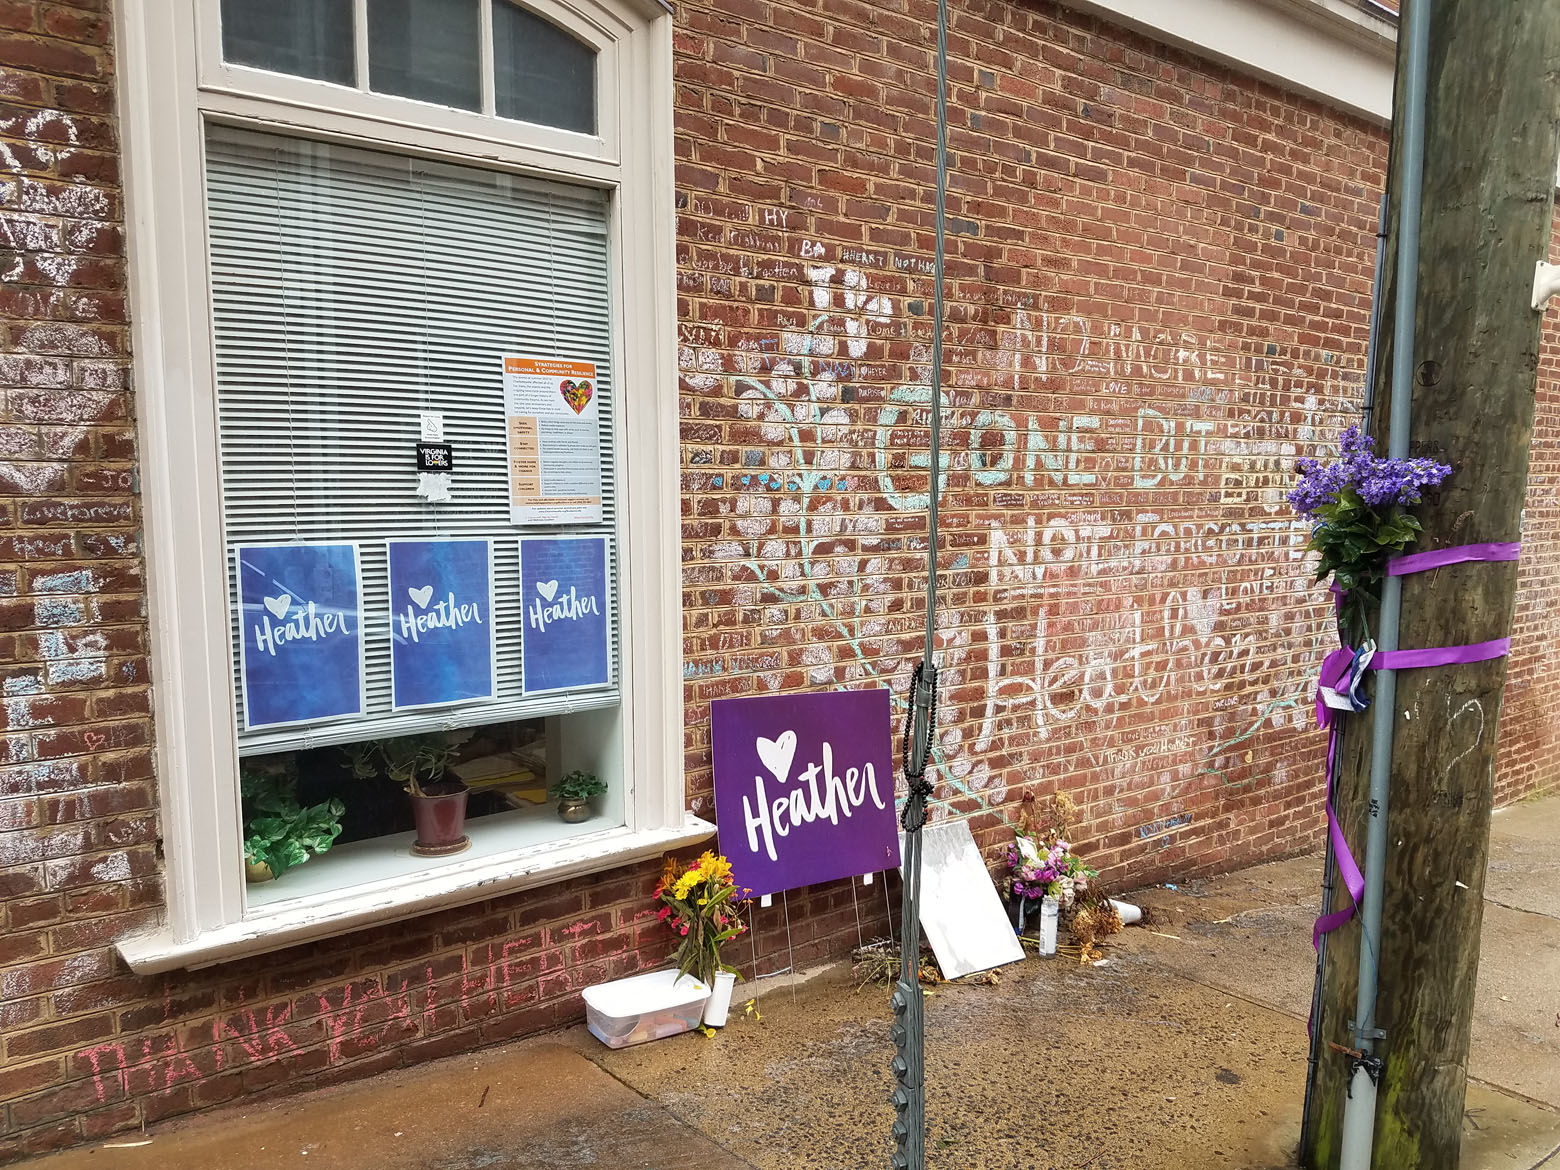 A memorial to Heather Heyer is seen in late July 2018 in downtown Charlottesville near where the 32-year-old was killed when a car plowed into a group of counterprotesters during last August's white nationalist "Unite the Right" rally. (WTOP/Lisa Weiner)